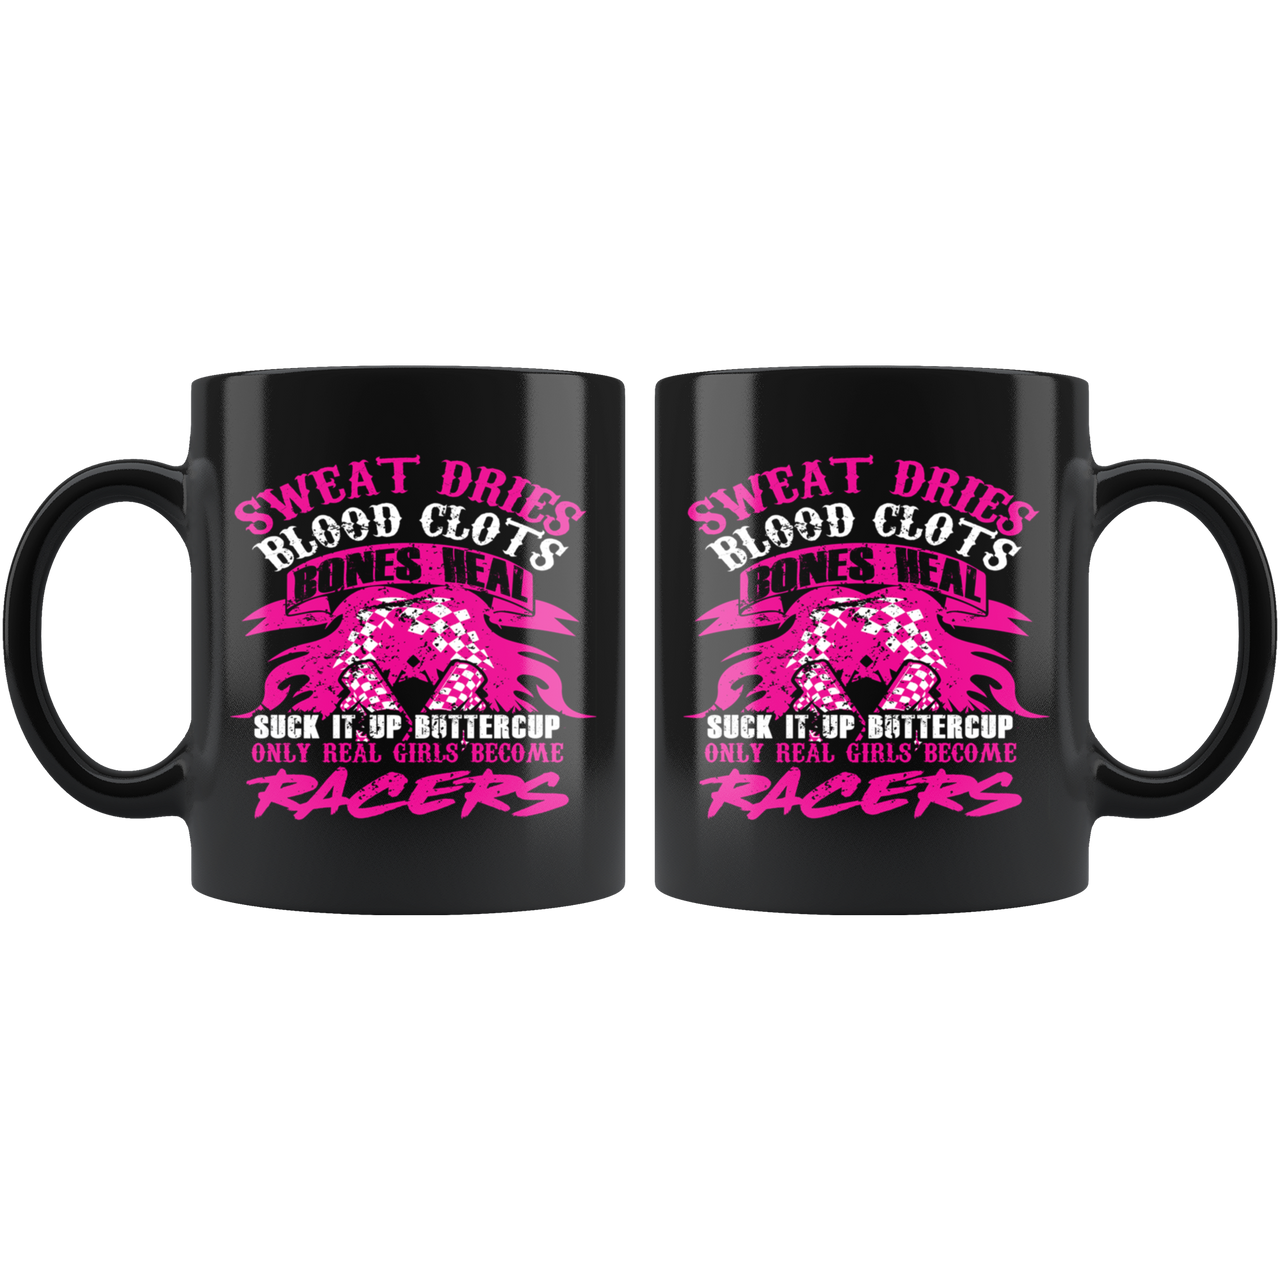 Sweat Dries Blood Clots Bones Heal Only Real Girls Become Racers Mug!